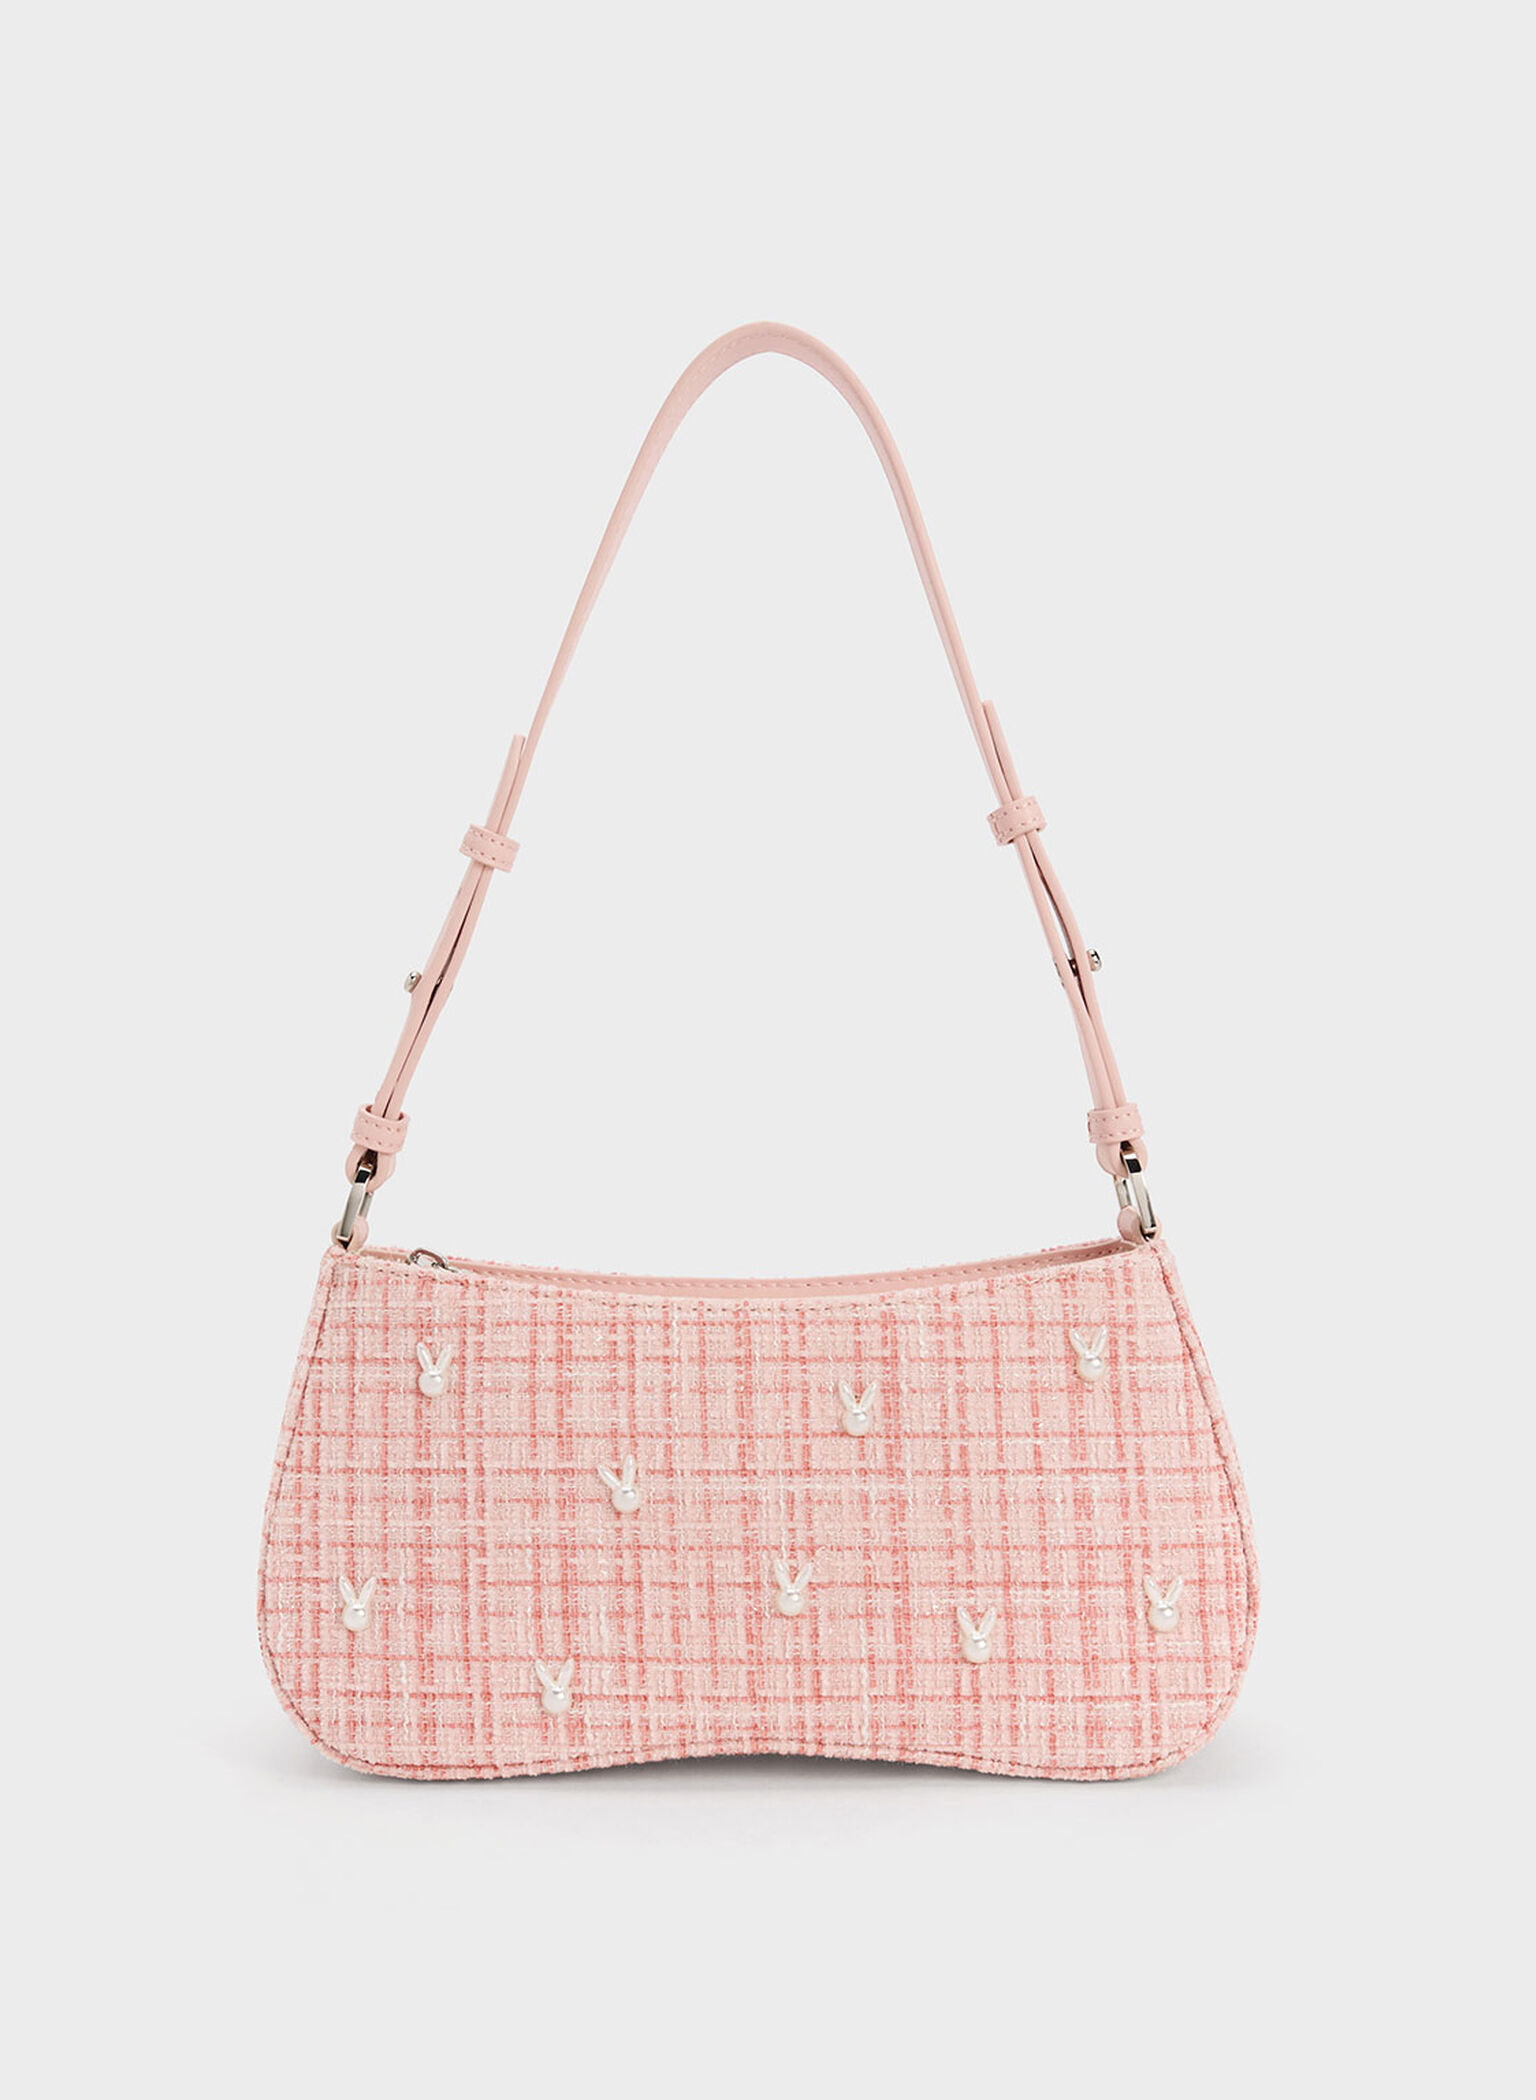 What Goes Around Comes Around Chanel Pink Tweed Rectangular Flap